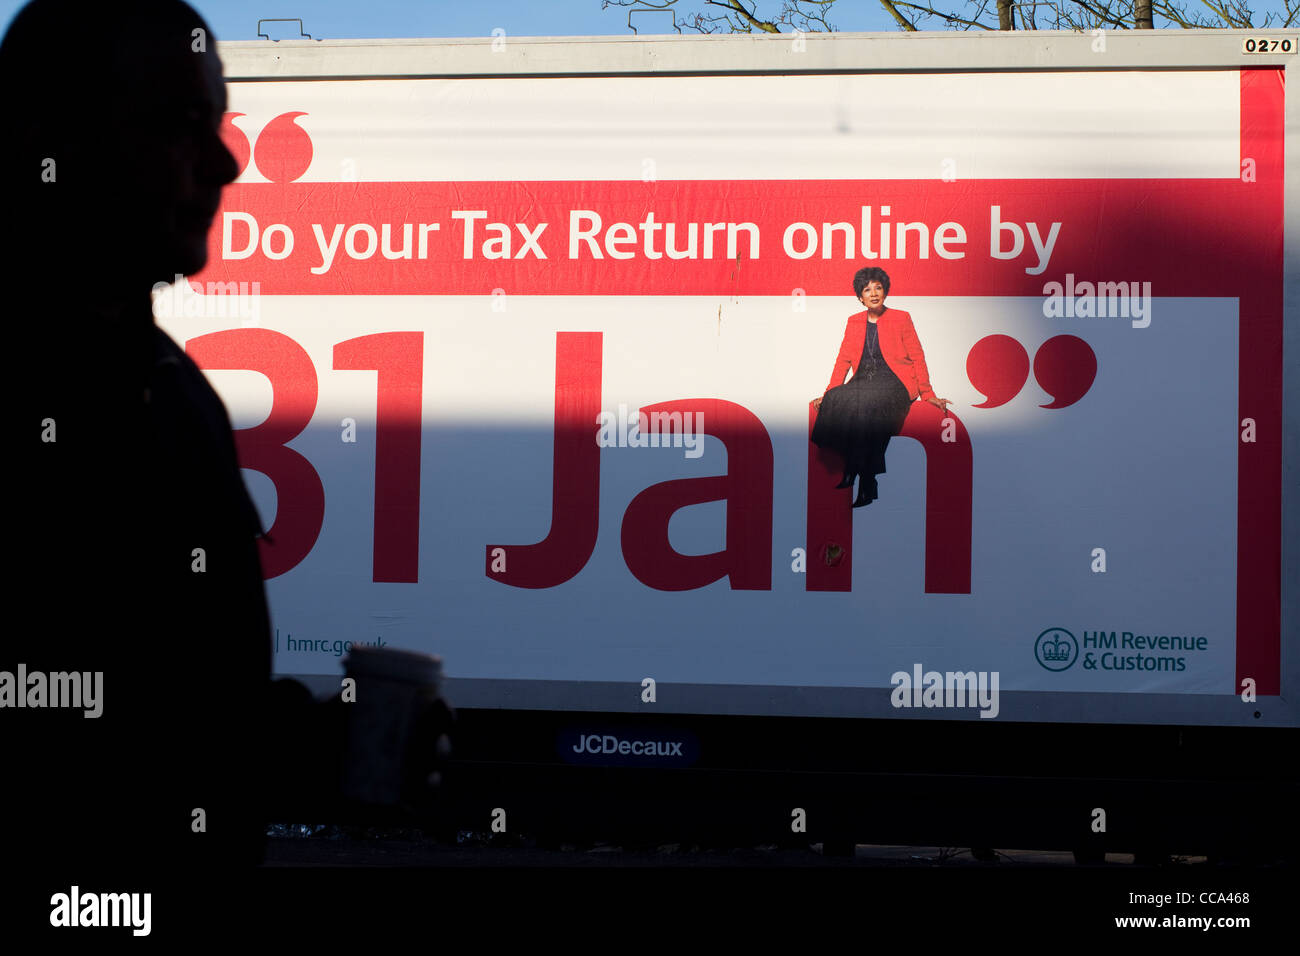 do-your-tax-return-online-by-31-jan-poster-billboard-hm-revenue-and